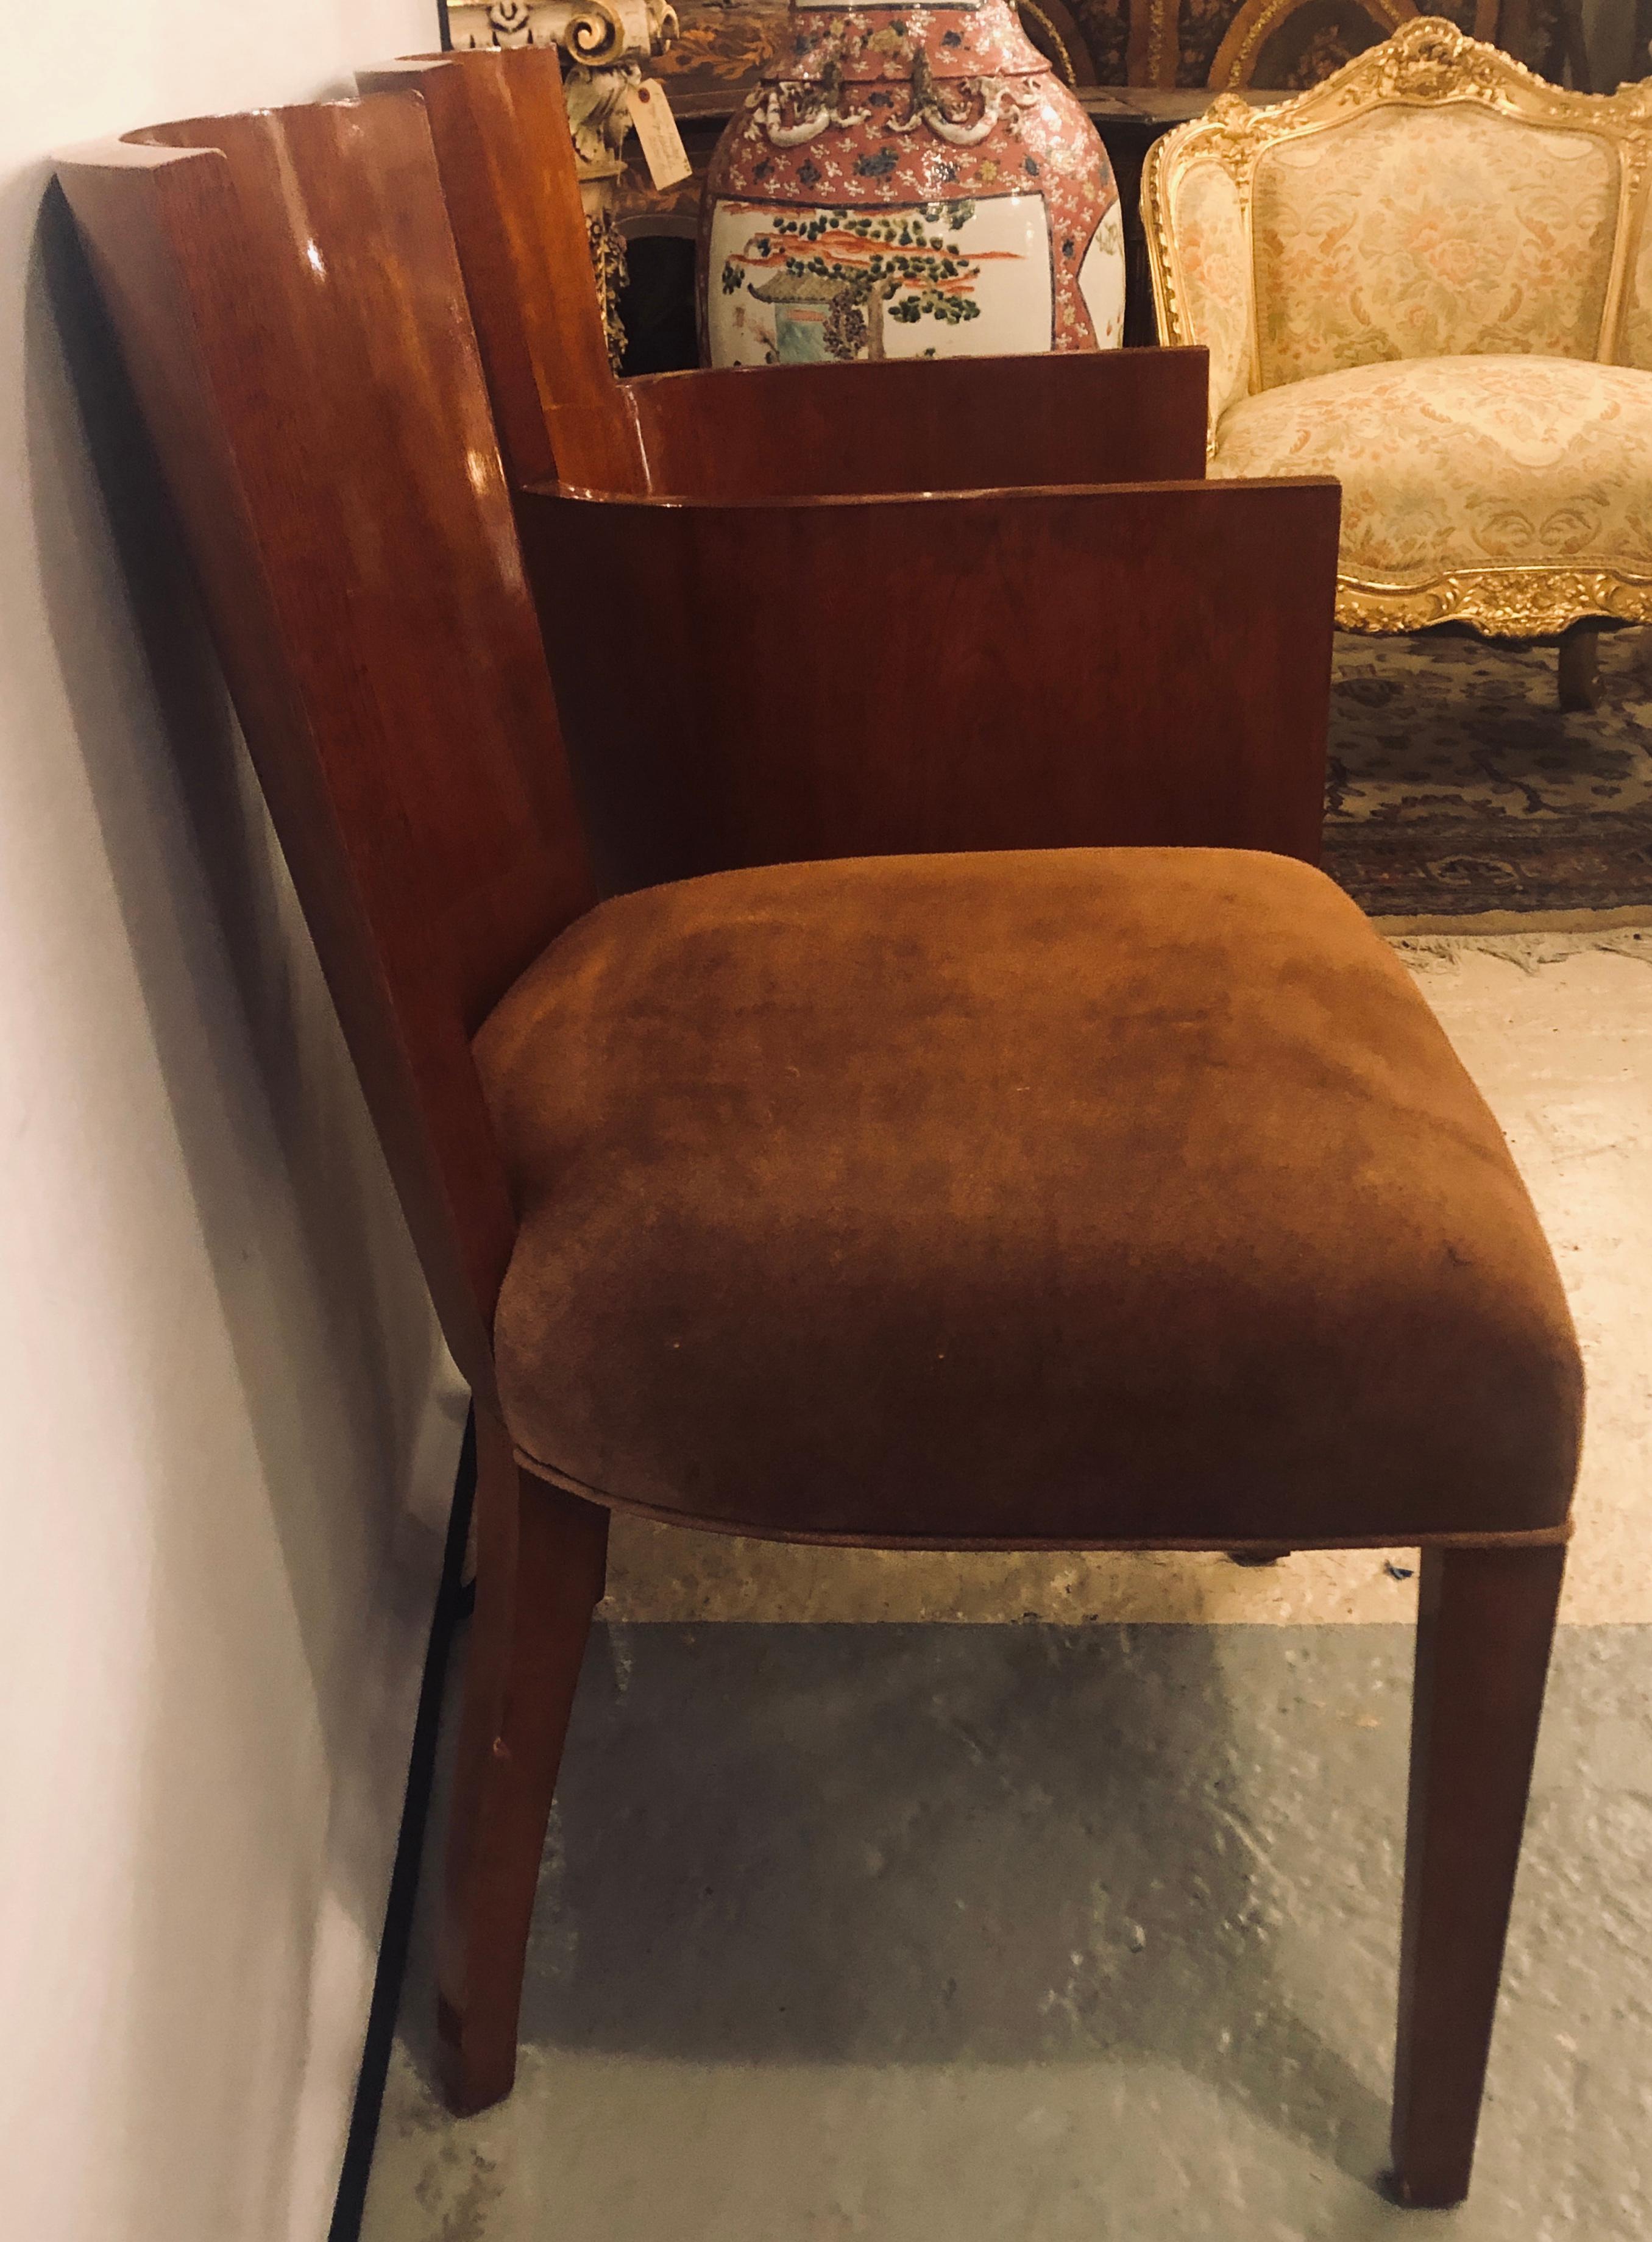 8 Modern Hollywood Mahogany Ralph Lauren Dining Chairs with Suede Seats 6 and 2 4